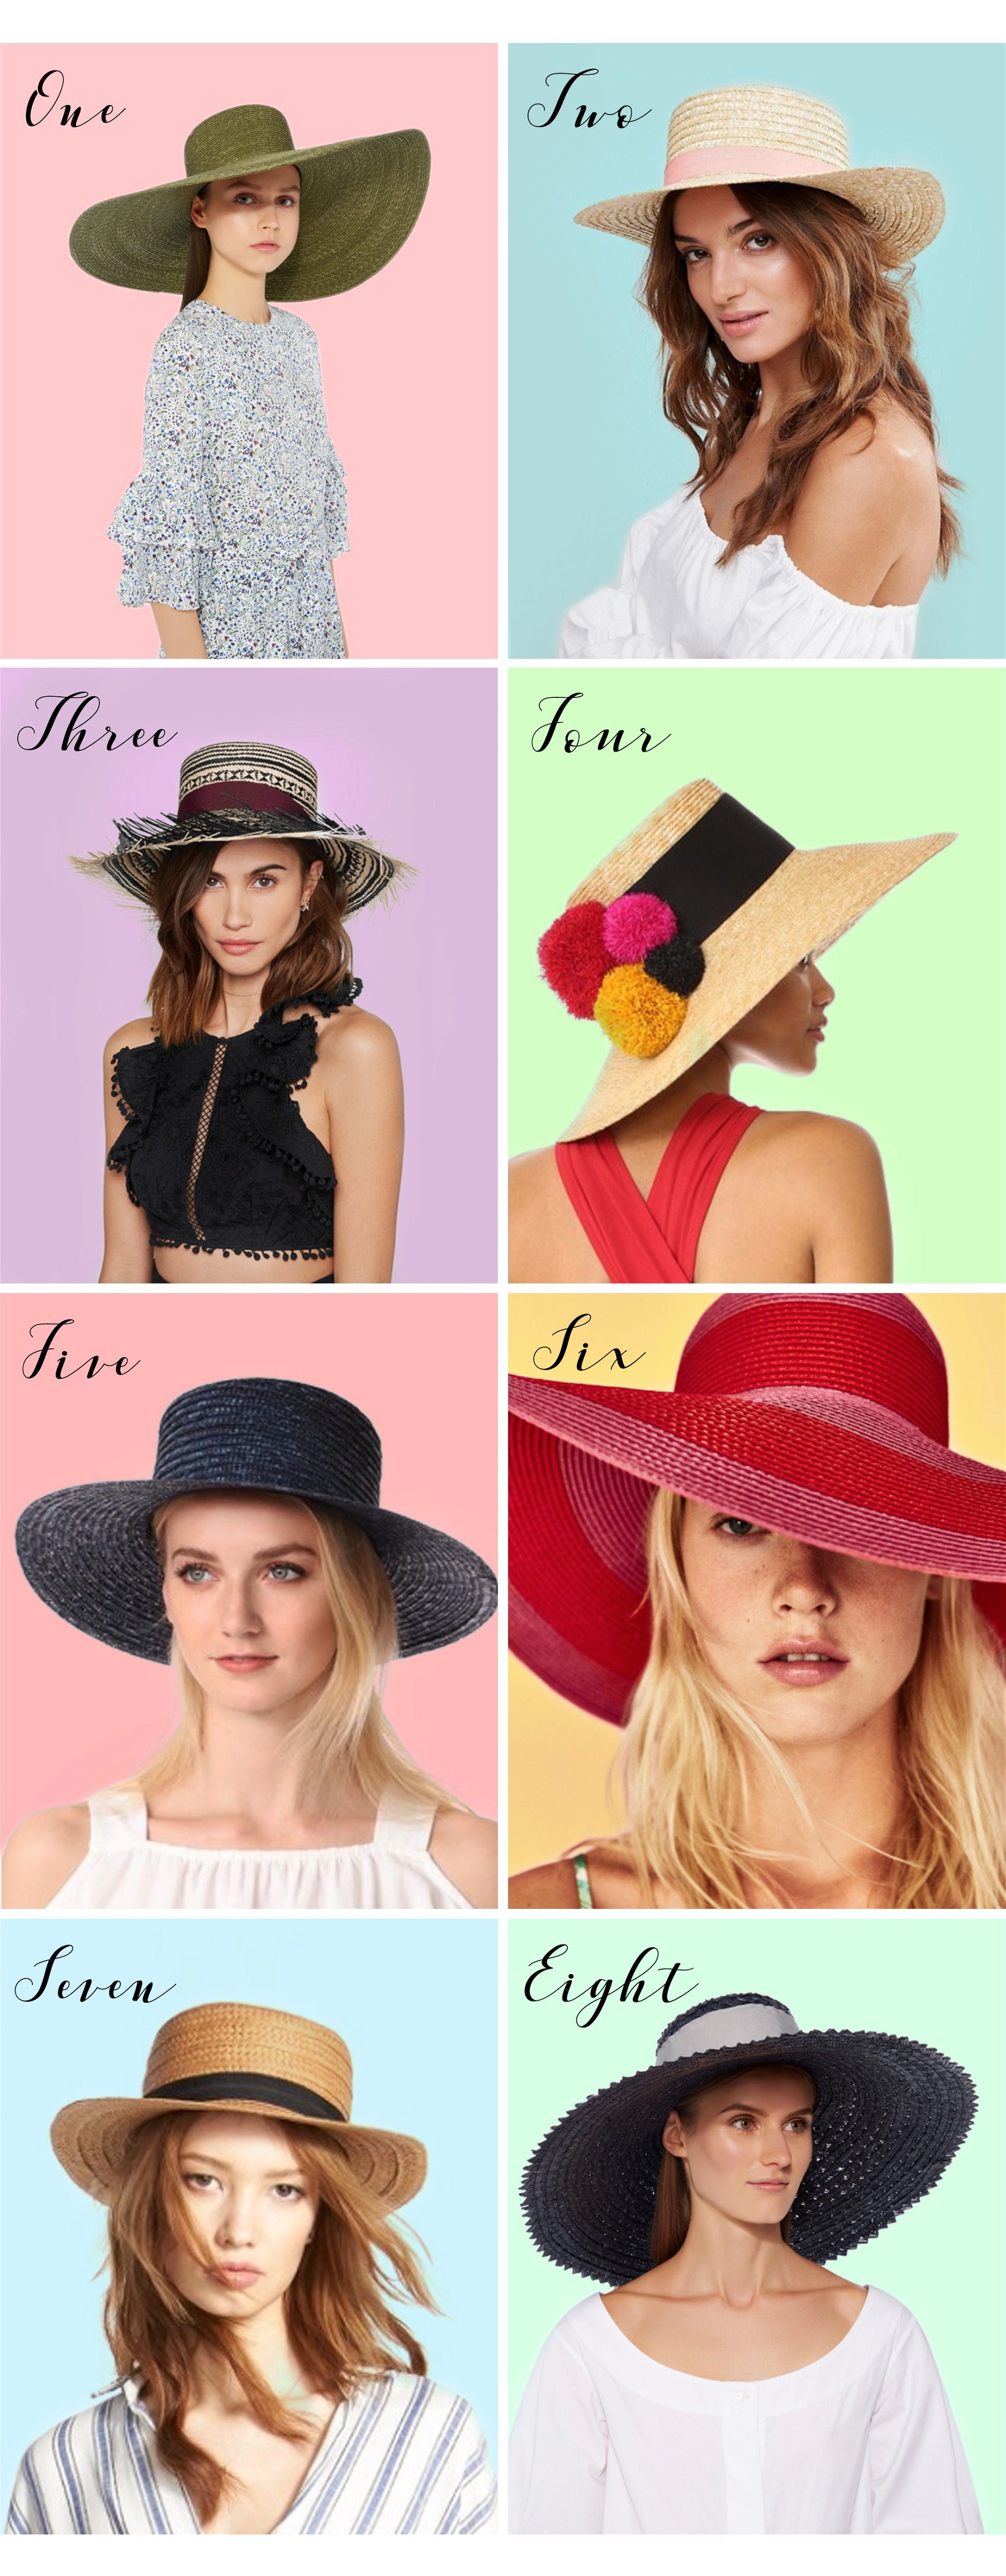 STRAW ACCESSORIES // SPRING HATS & BAGS - Atlantic-Pacific